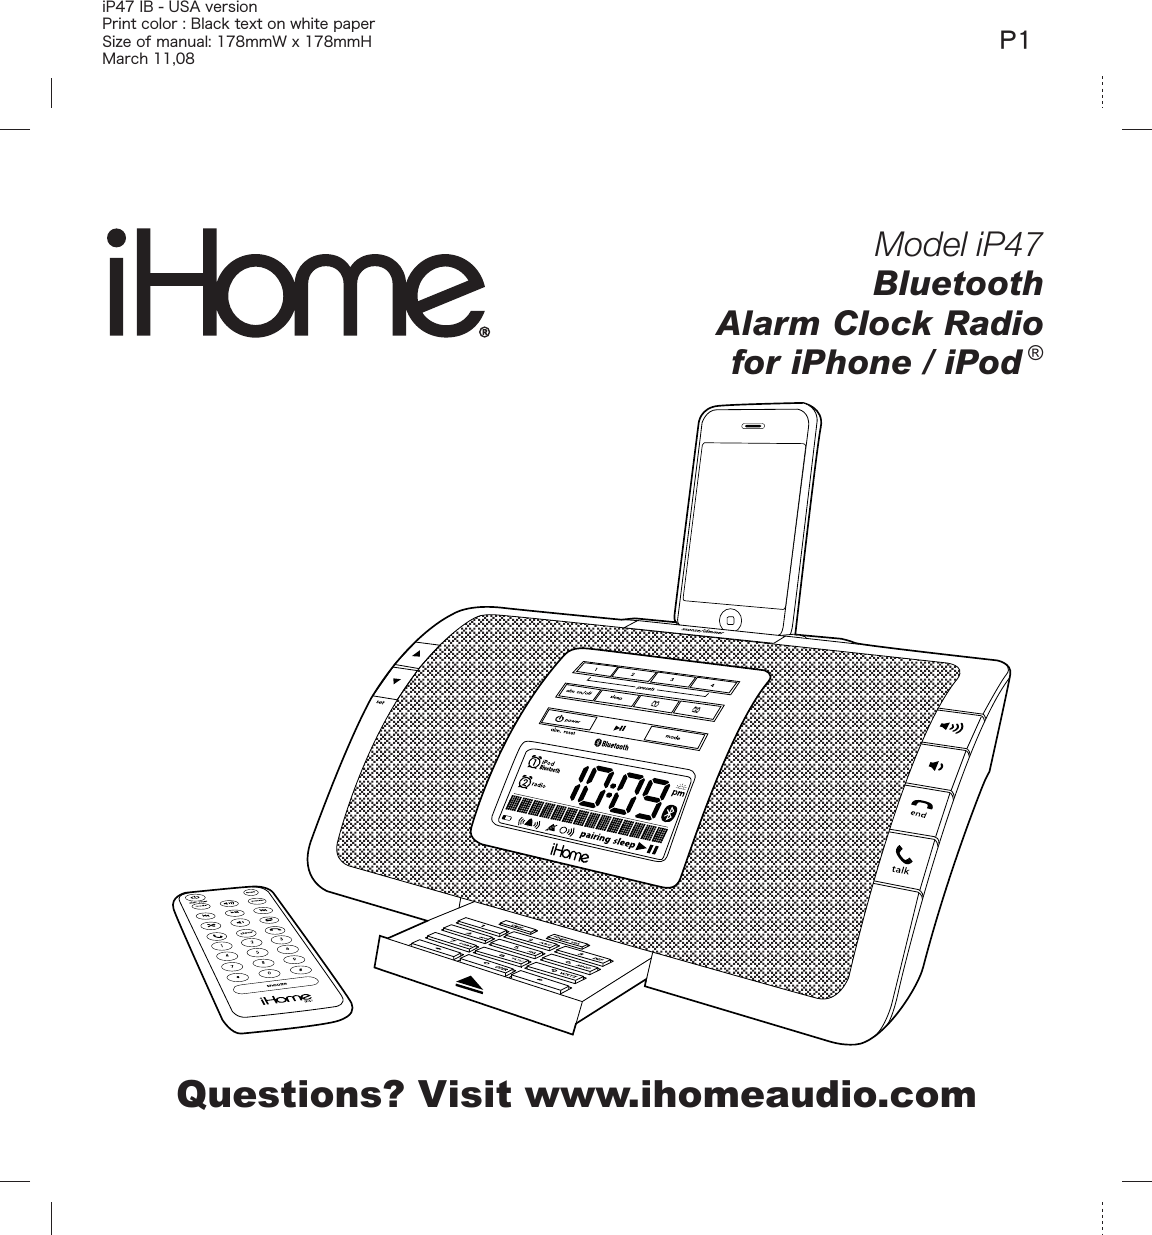 Model iP47BluetoothAlarm Clock Radiofor iPhone / iPod ®Questions? Visit www.ihomeaudio.comiP47 IB - USA version Print color : Black text on white paperSize of manual: 178mmW x 178mmHMarch 11,08P1